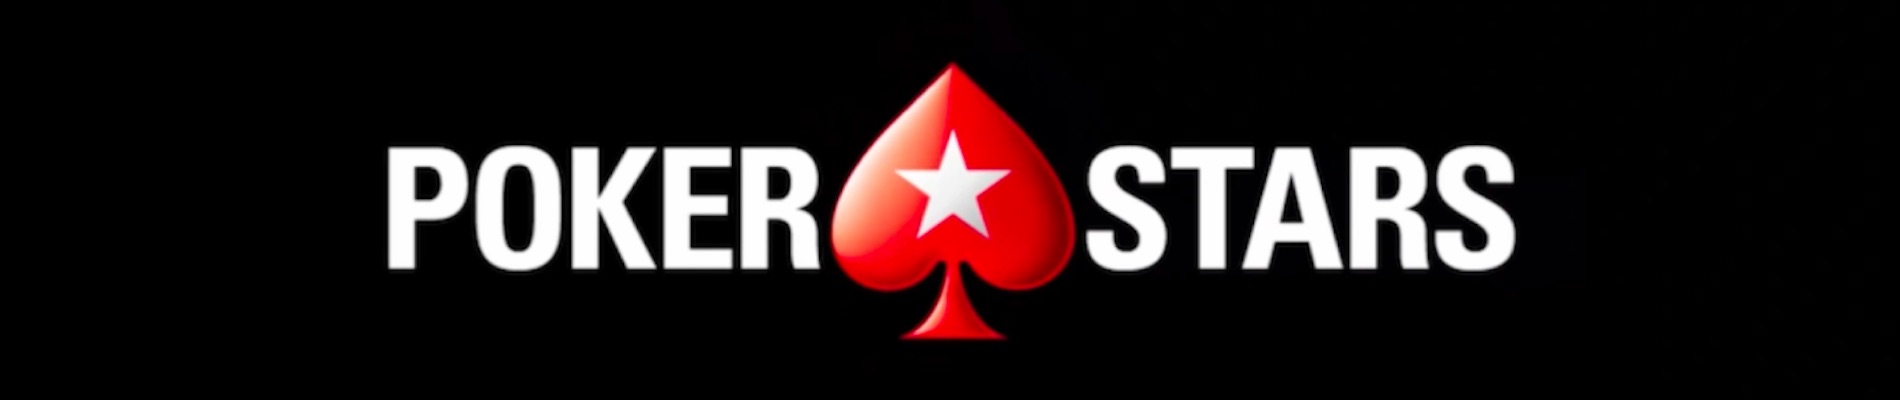 Poker Stars To Launch Ring-Fenced Network in Ontario